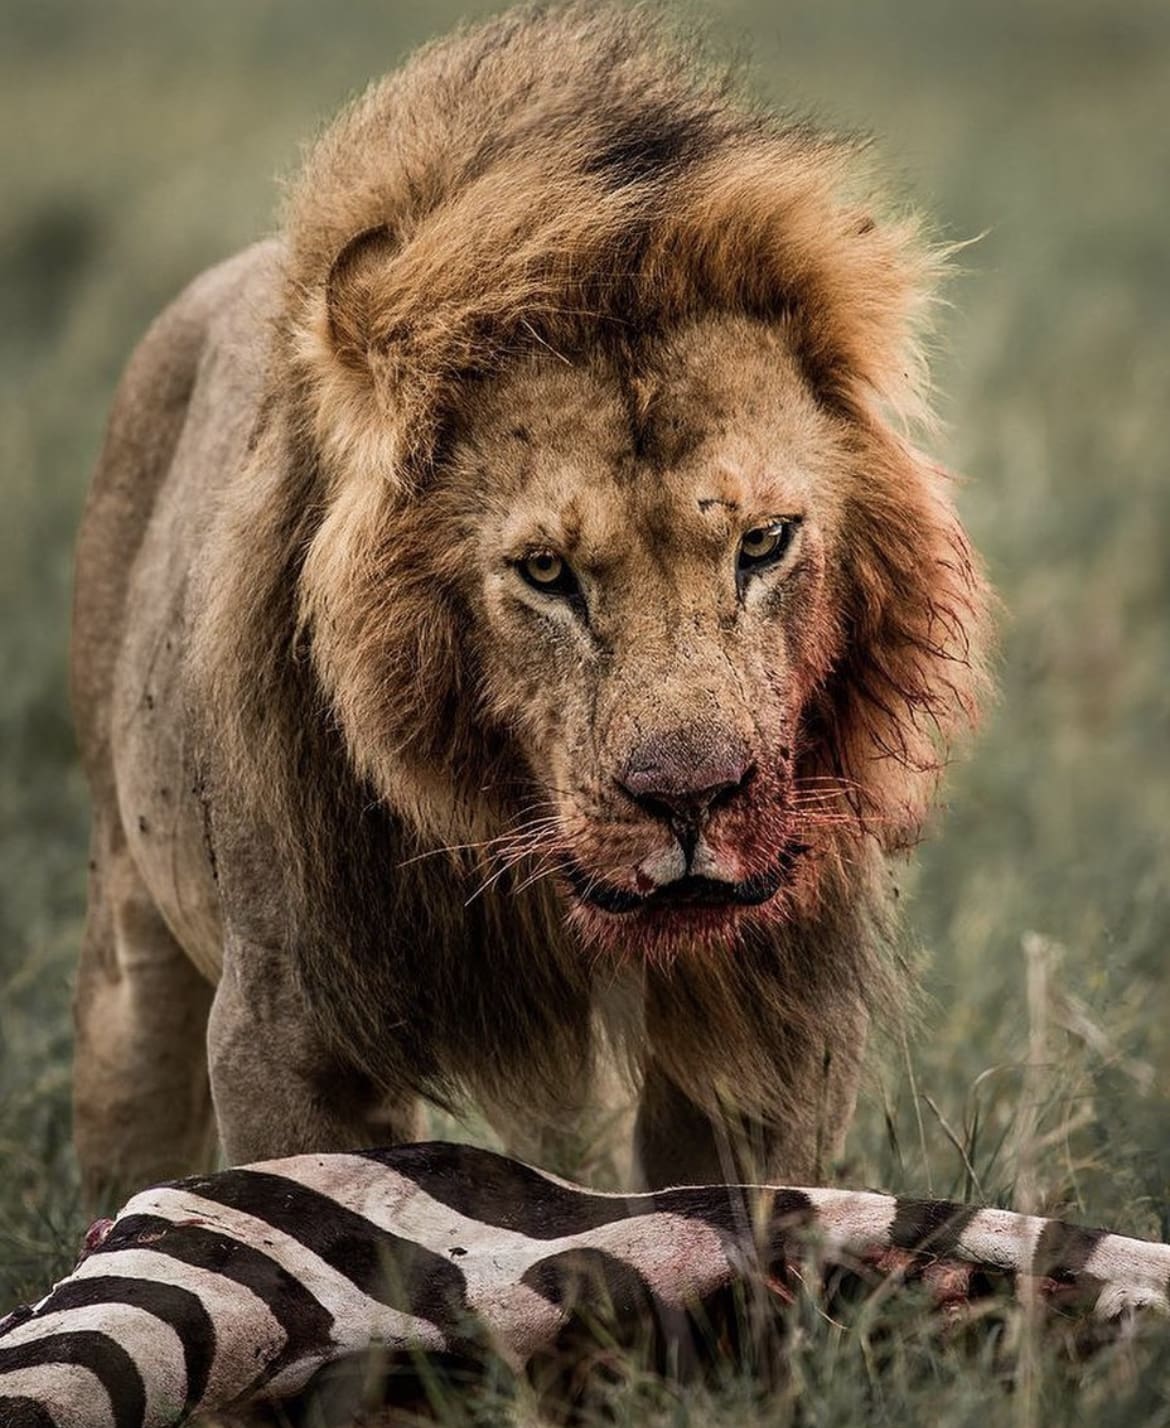 Bloody male lion stands over a zebra carcass - What do lions eat?